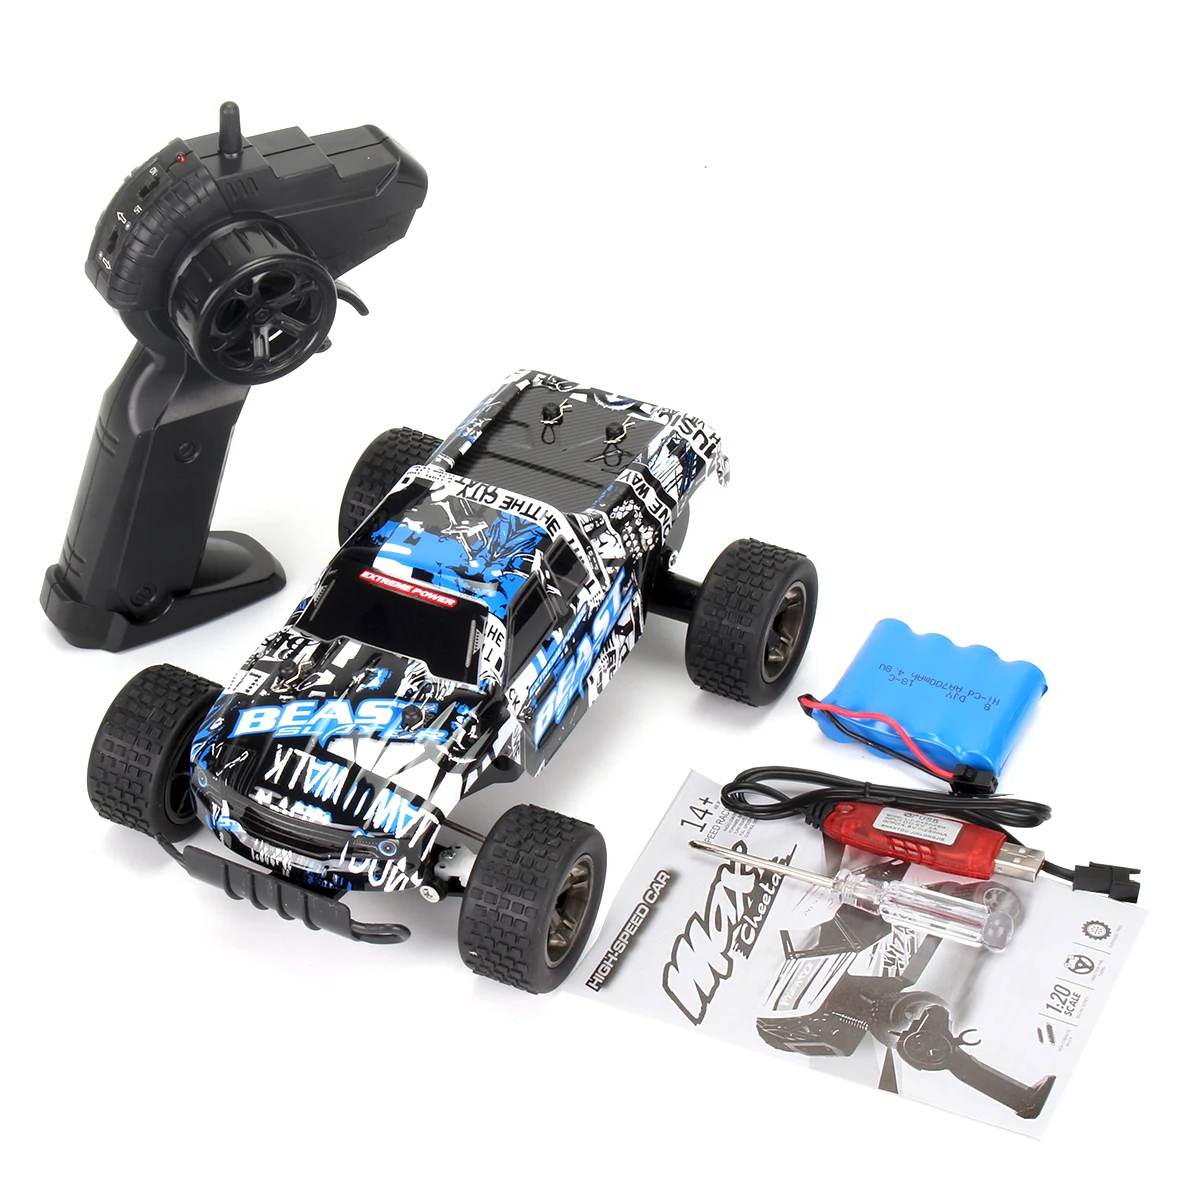 

New Wltoys RC Car 4-channel 2-wheel Drive High-speed 2.4G Remote Control With Simulated Rubber Tires For Kids Birthday Gift